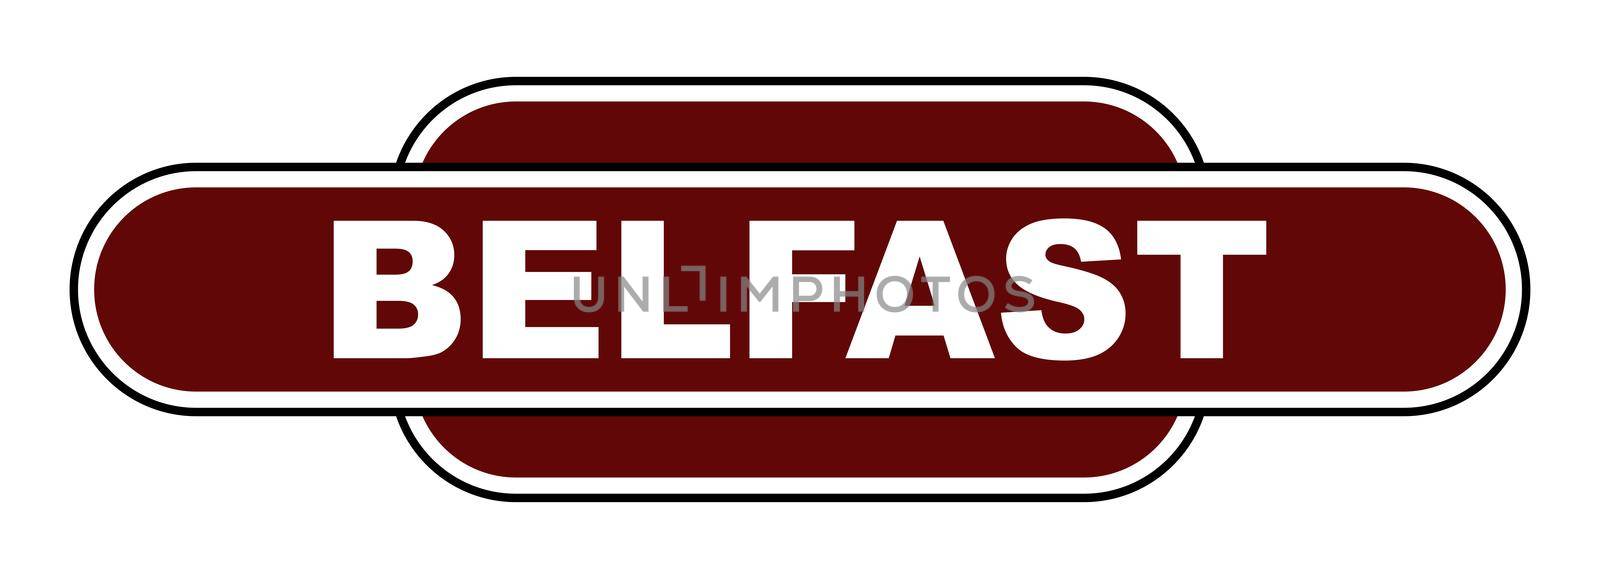 Old Fashioned Belfast Station Name Sign by Bigalbaloo